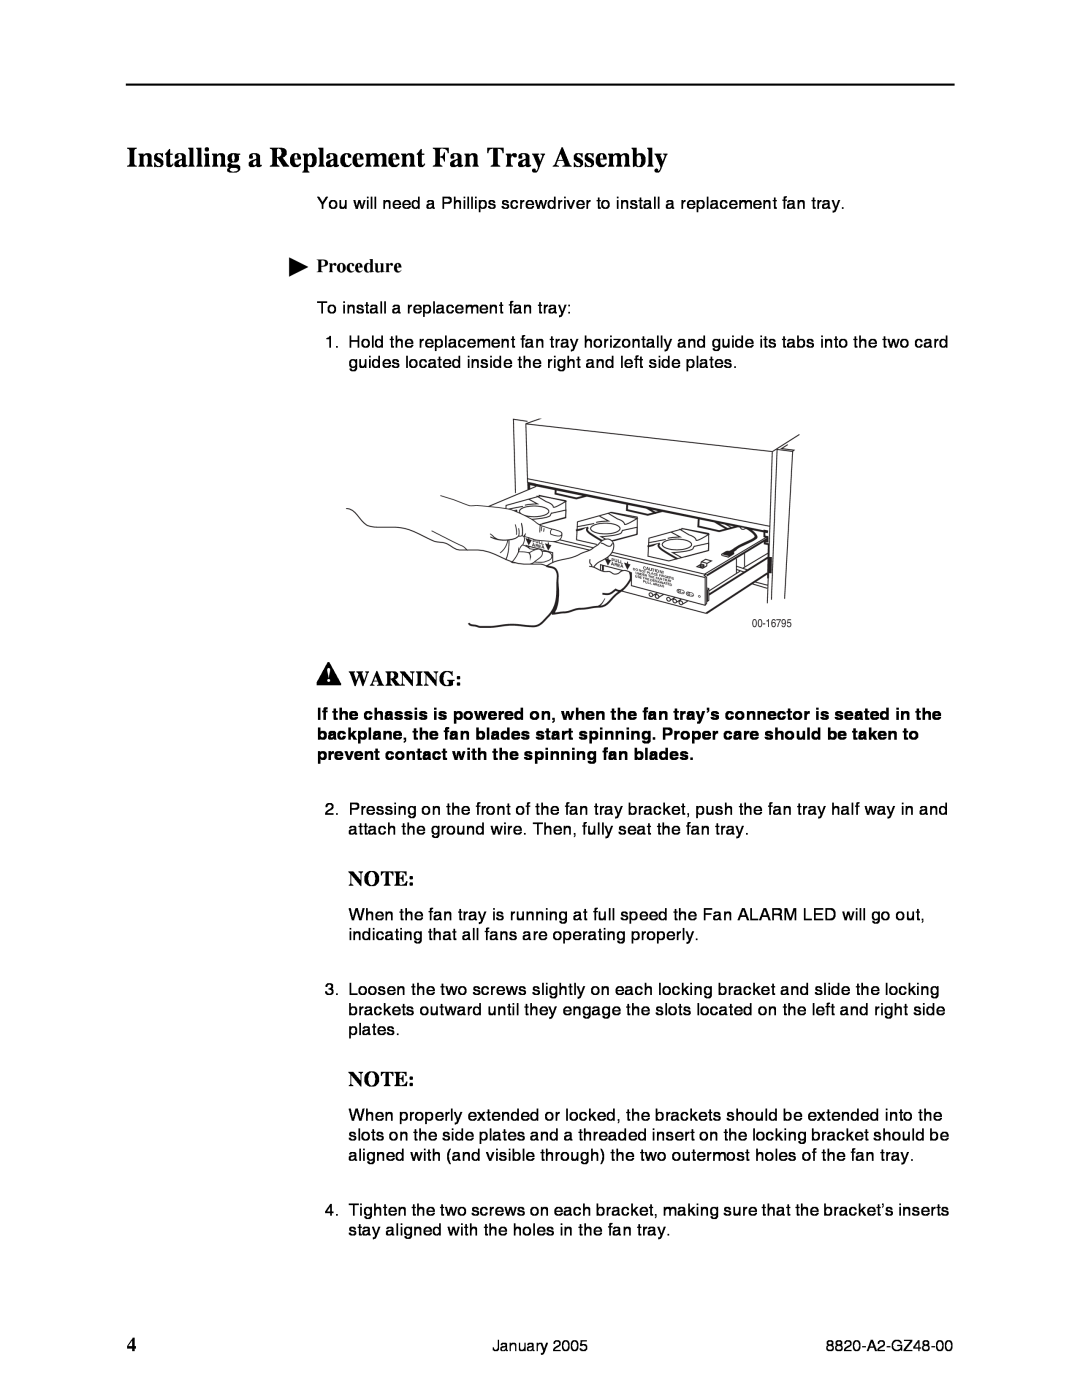 Paradyne 8820-S3-900 installation instructions Installing a Replacement Fan Tray Assembly, Procedure 